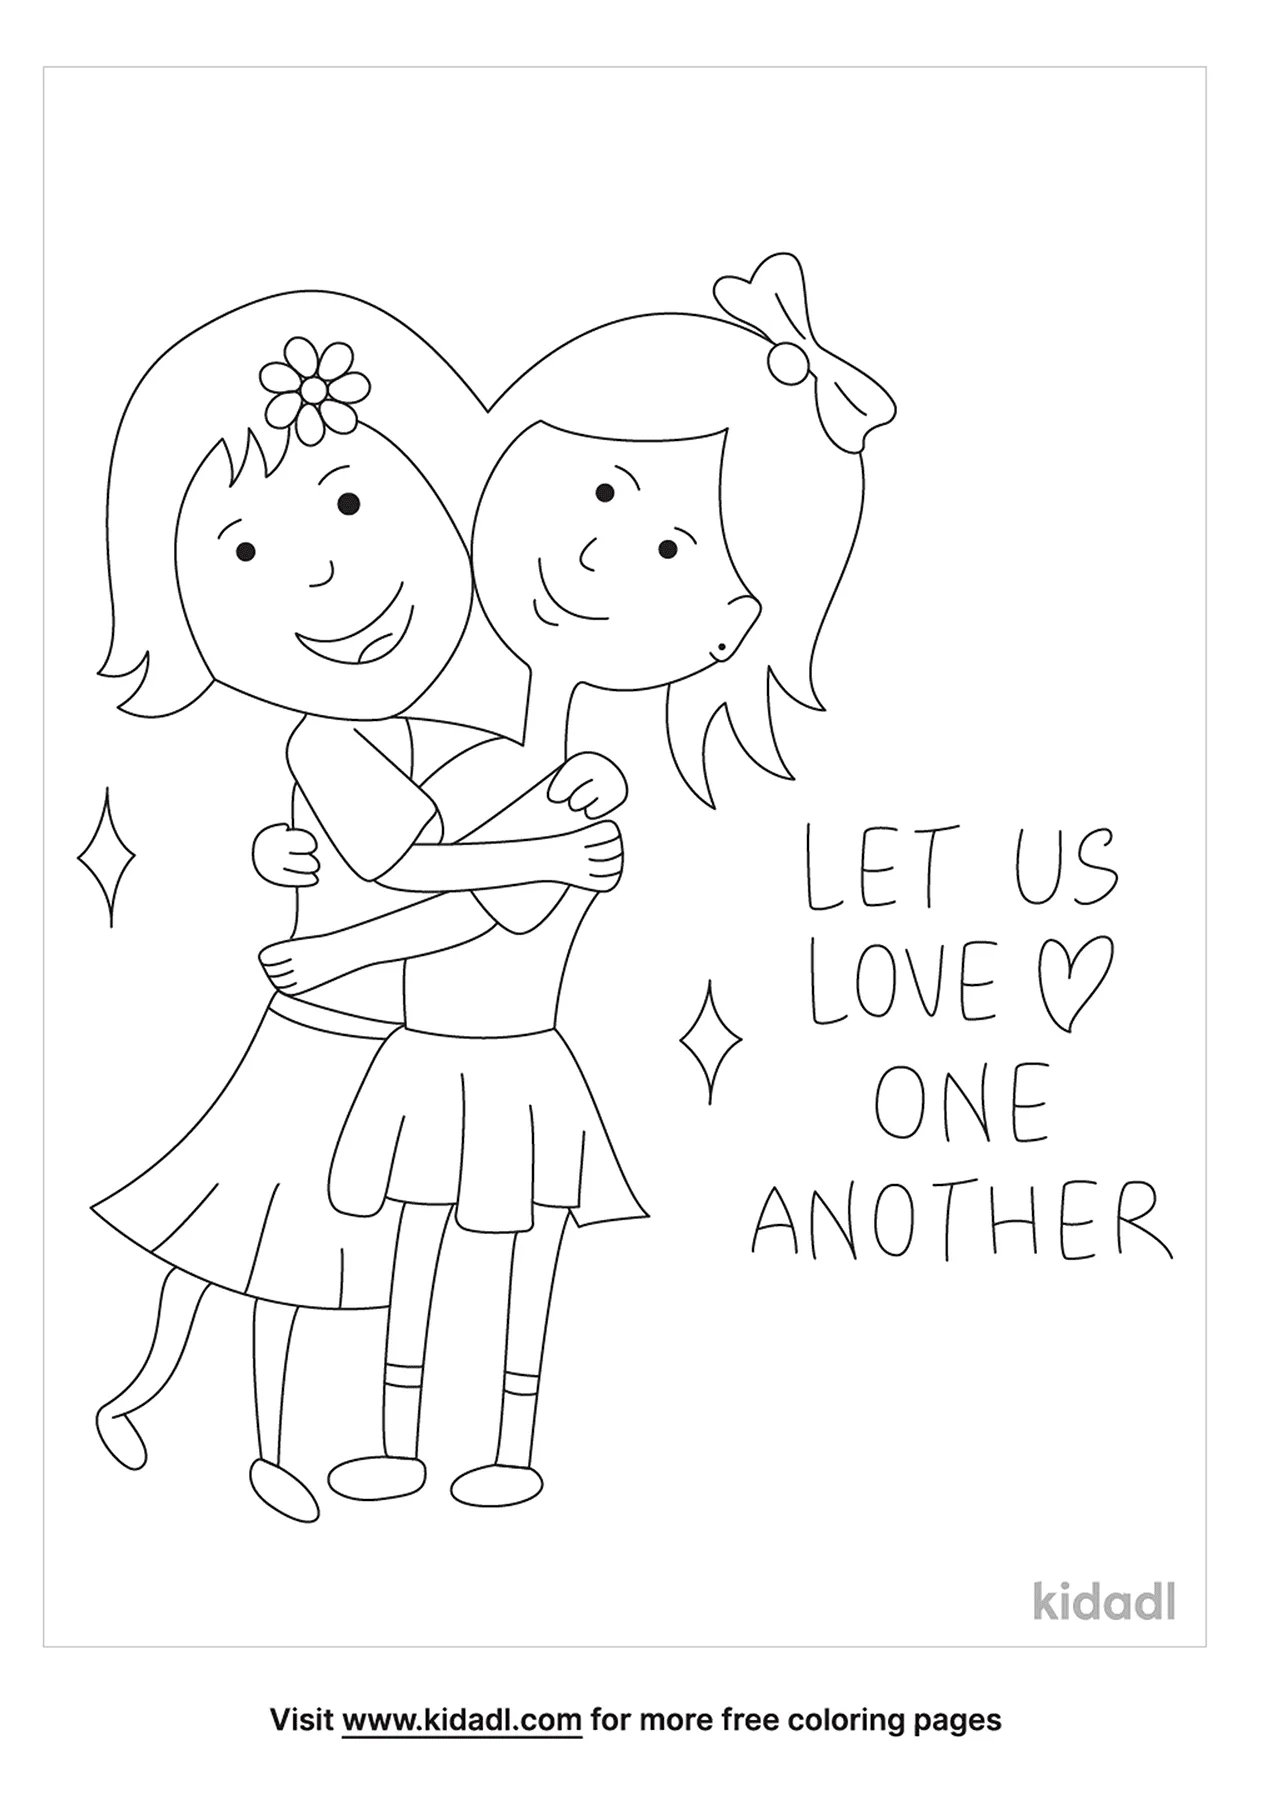 Free let us love one another coloring page coloring page printables